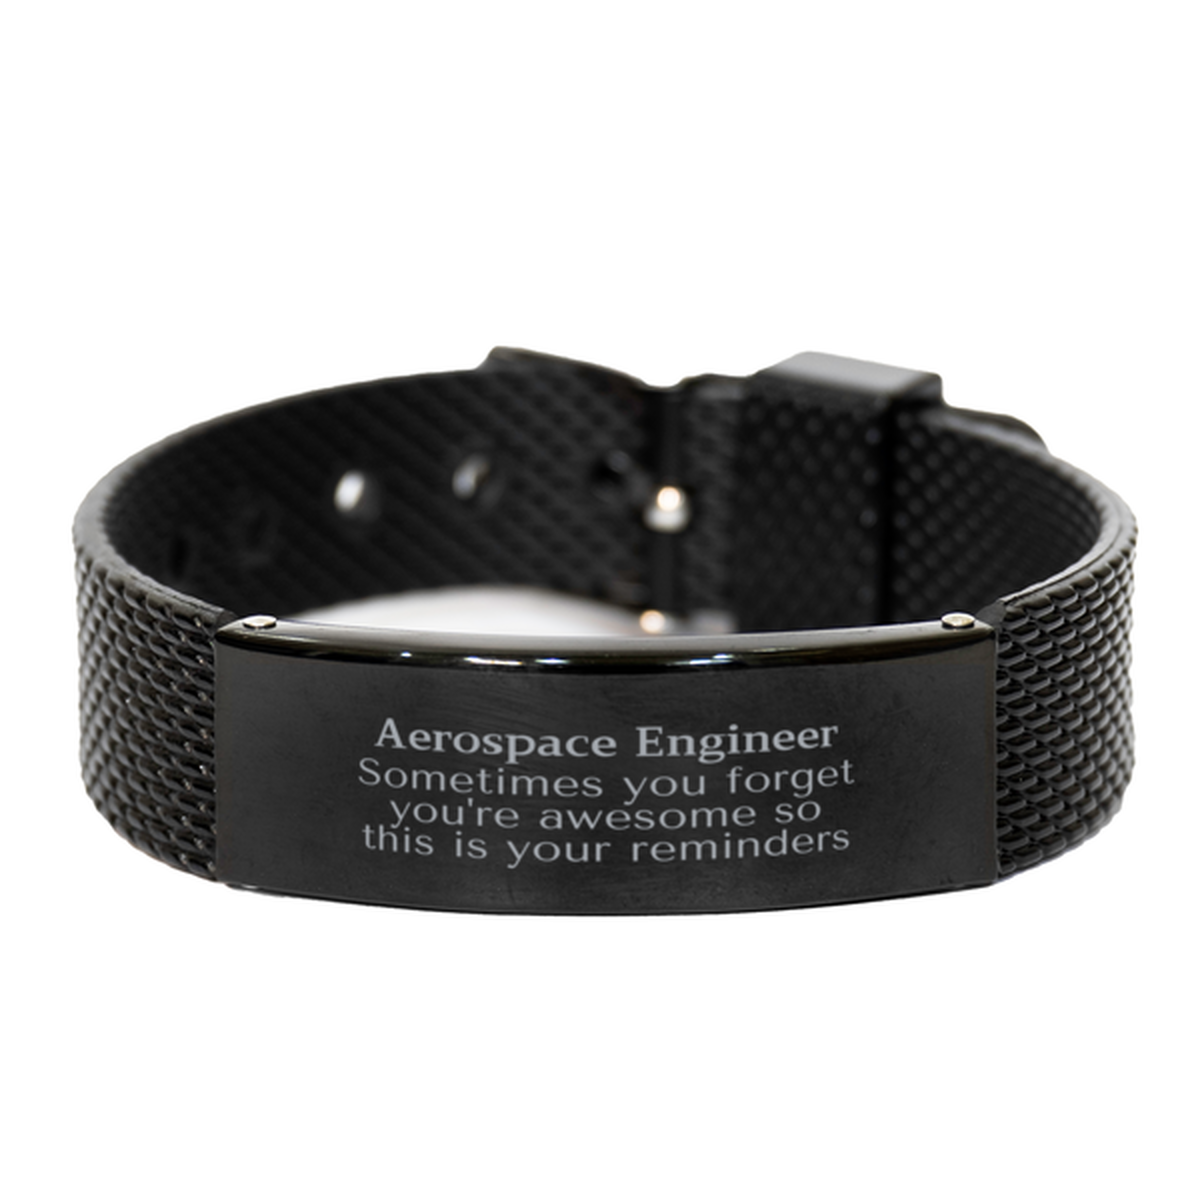 Sentimental Aerospace Engineer Black Shark Mesh Bracelet, Aerospace Engineer Sometimes you forget you're awesome so this is your reminders, Graduation Christmas Birthday Gifts for Aerospace Engineer, Men, Women, Coworkers